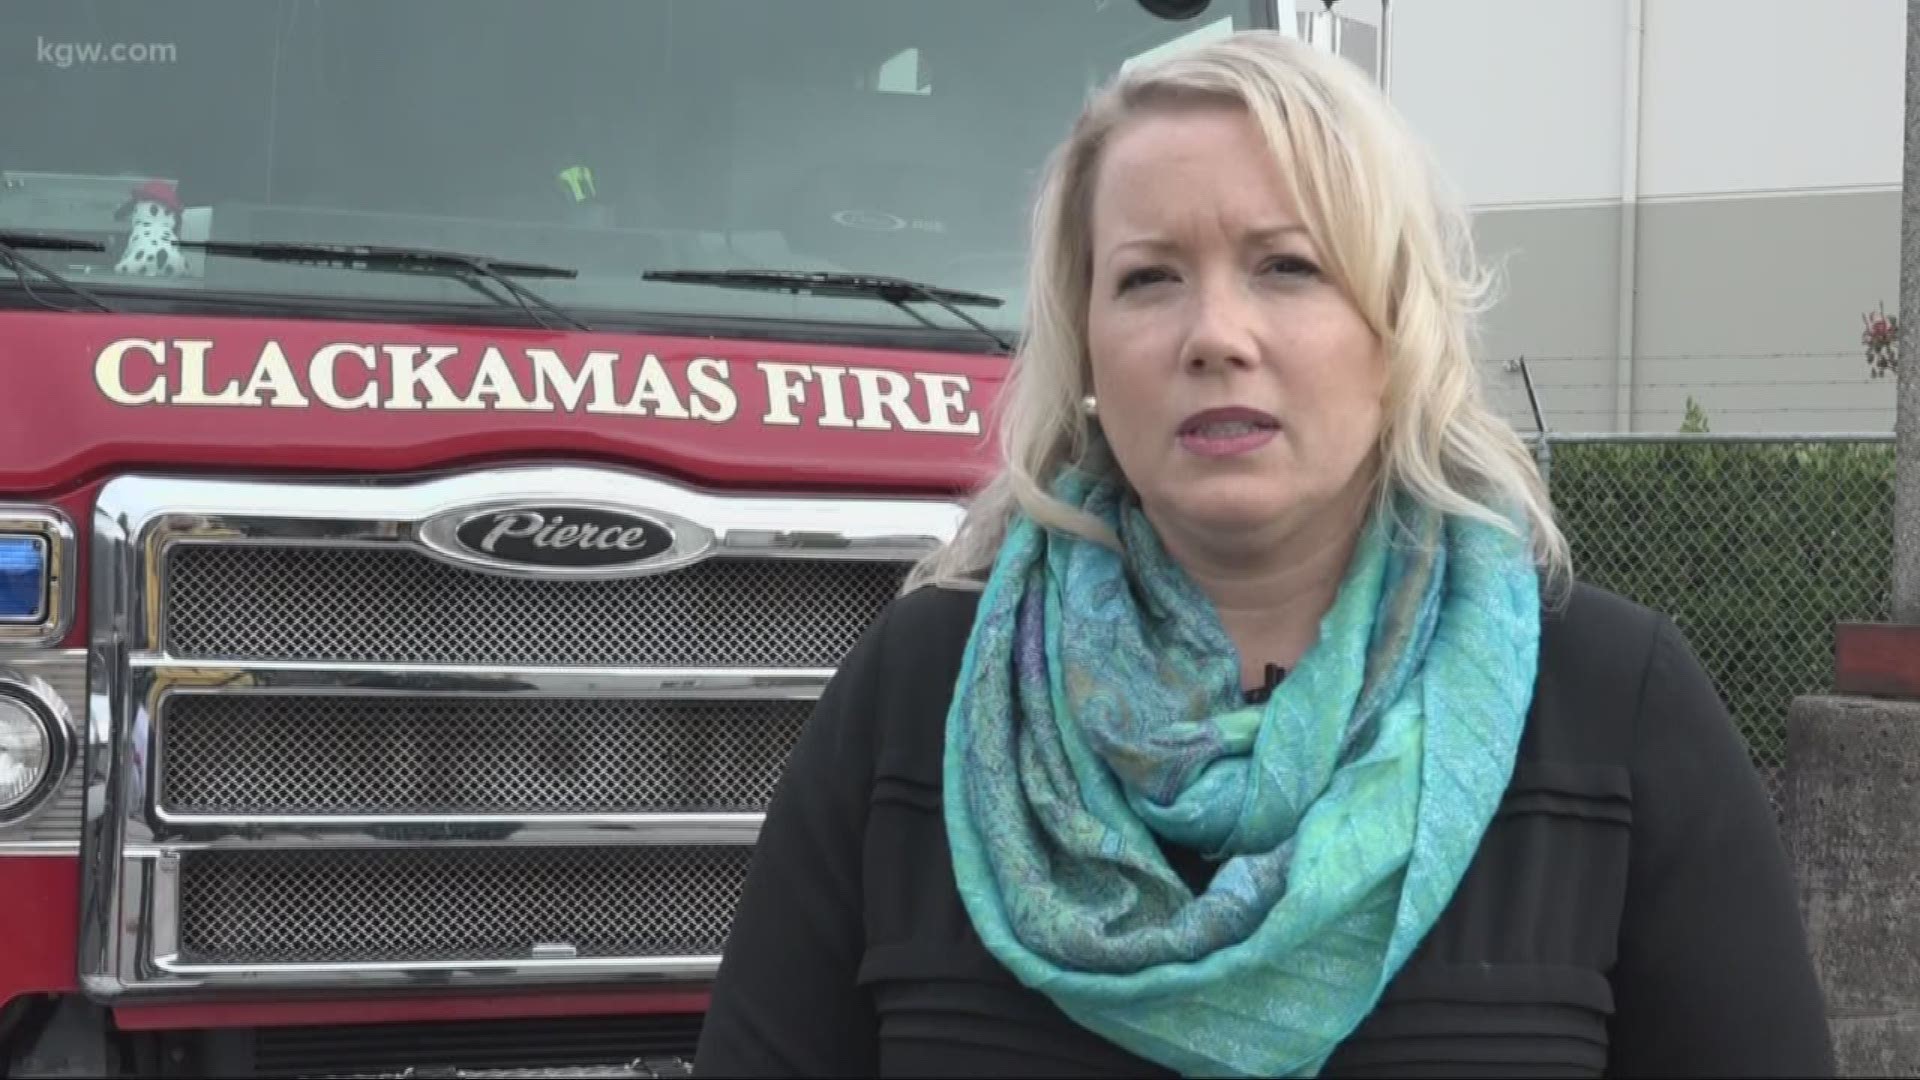 A woman who survived a fire hopes her story can help others.